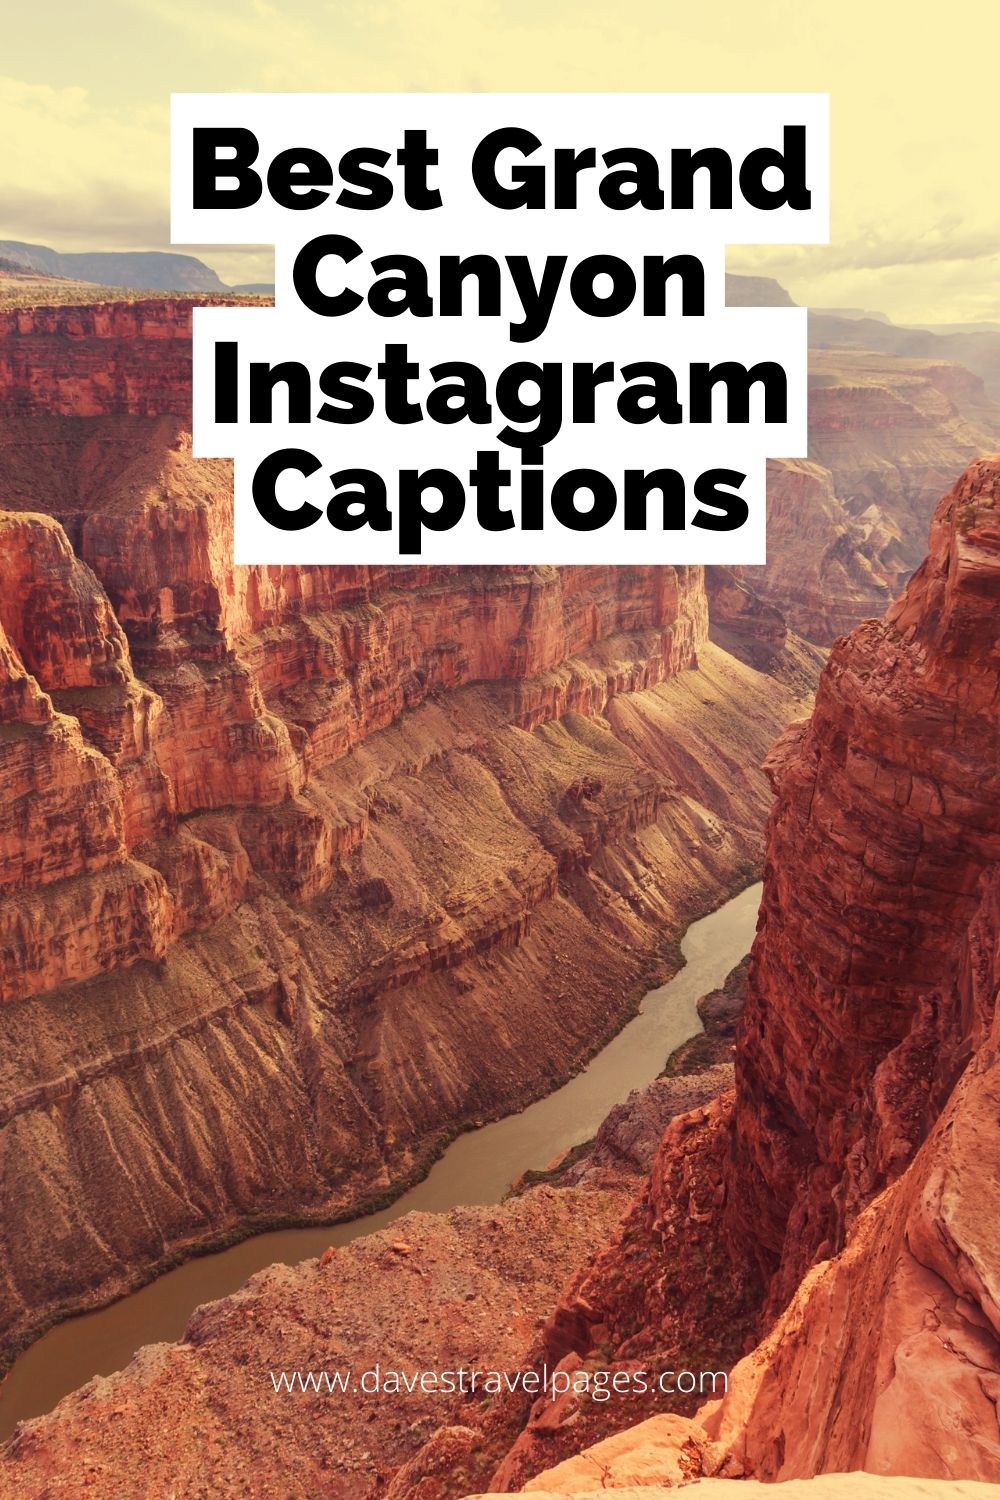 Instagram Captions About The Grand Canyon